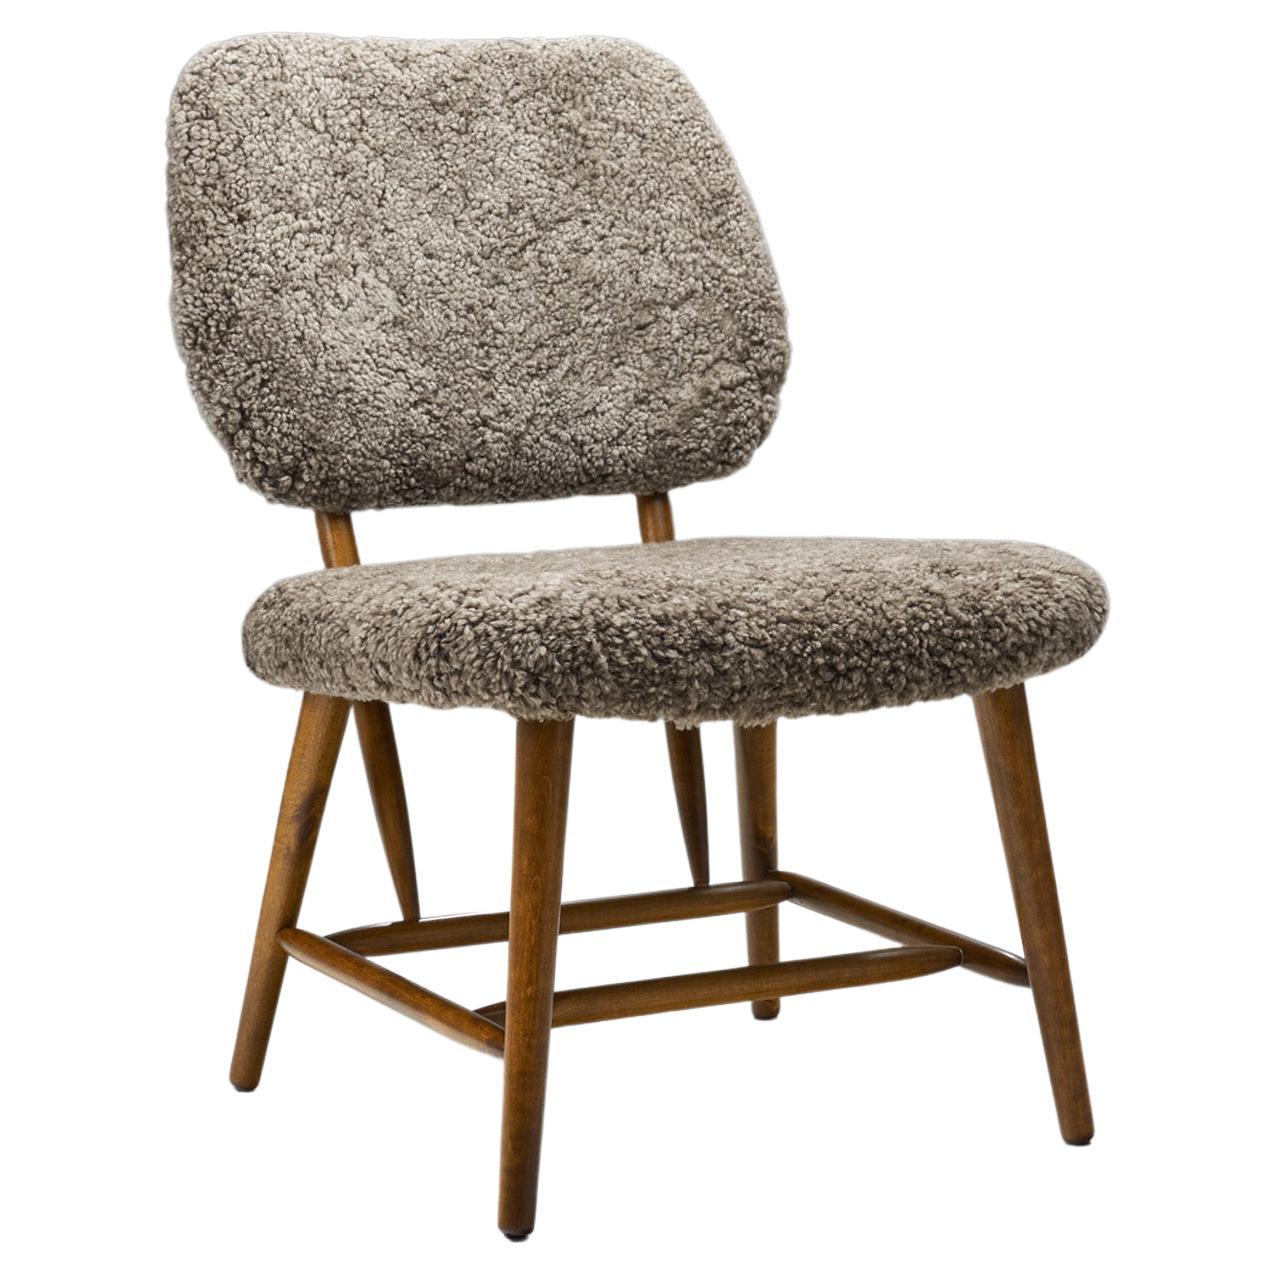 Swedish Mid-Century Easy Chair with Sheepskin, Sweden 1950s For Sale